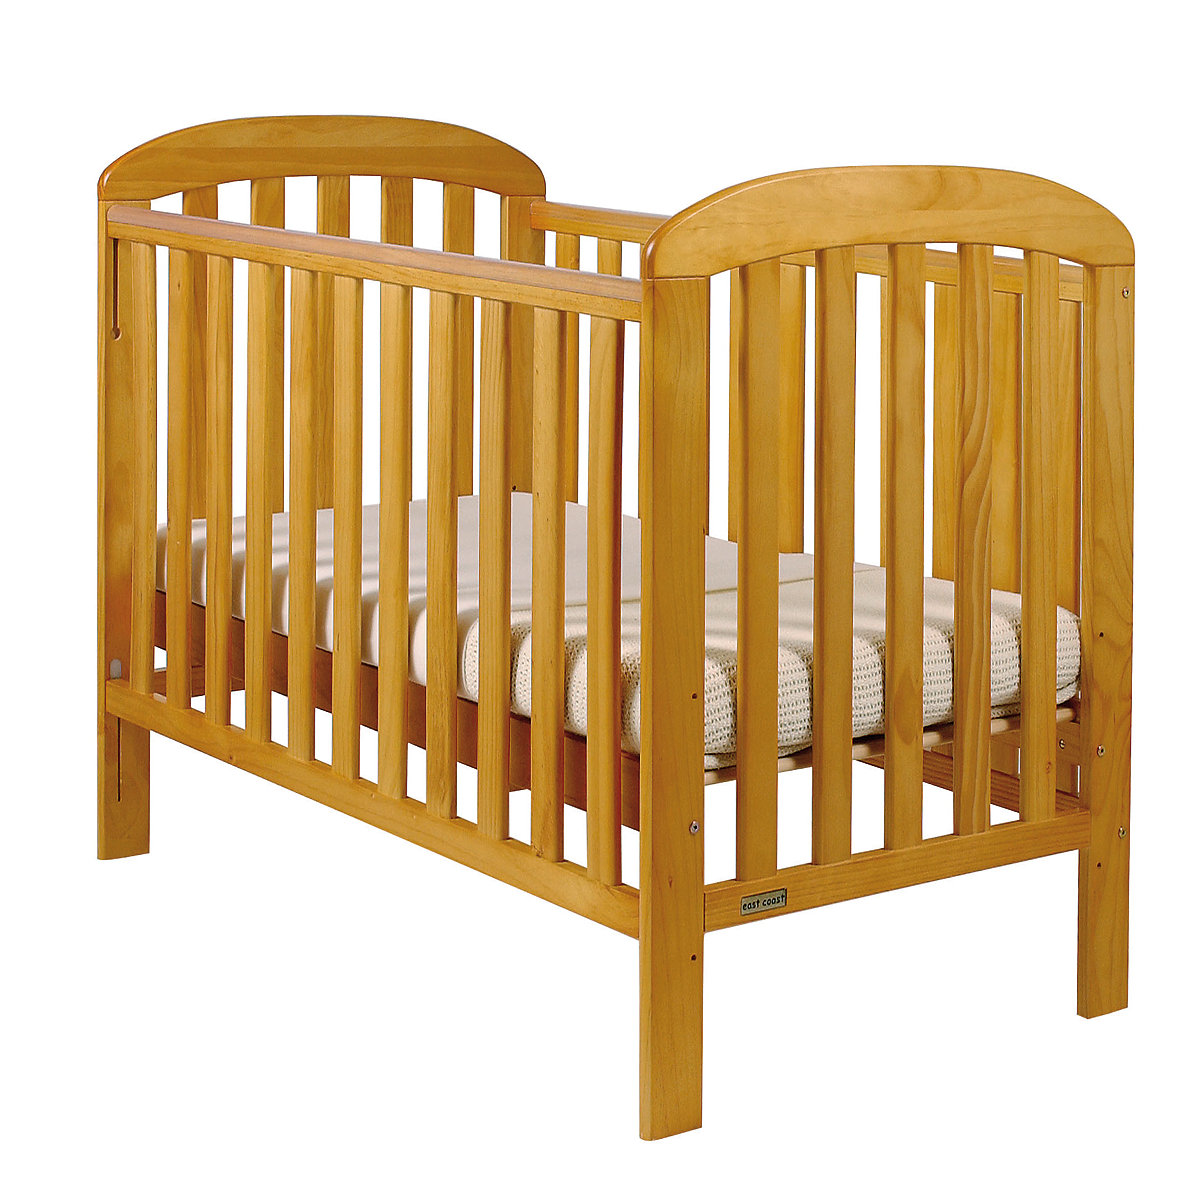 TIPS FOR ASSEMBLING YOUR COT BED